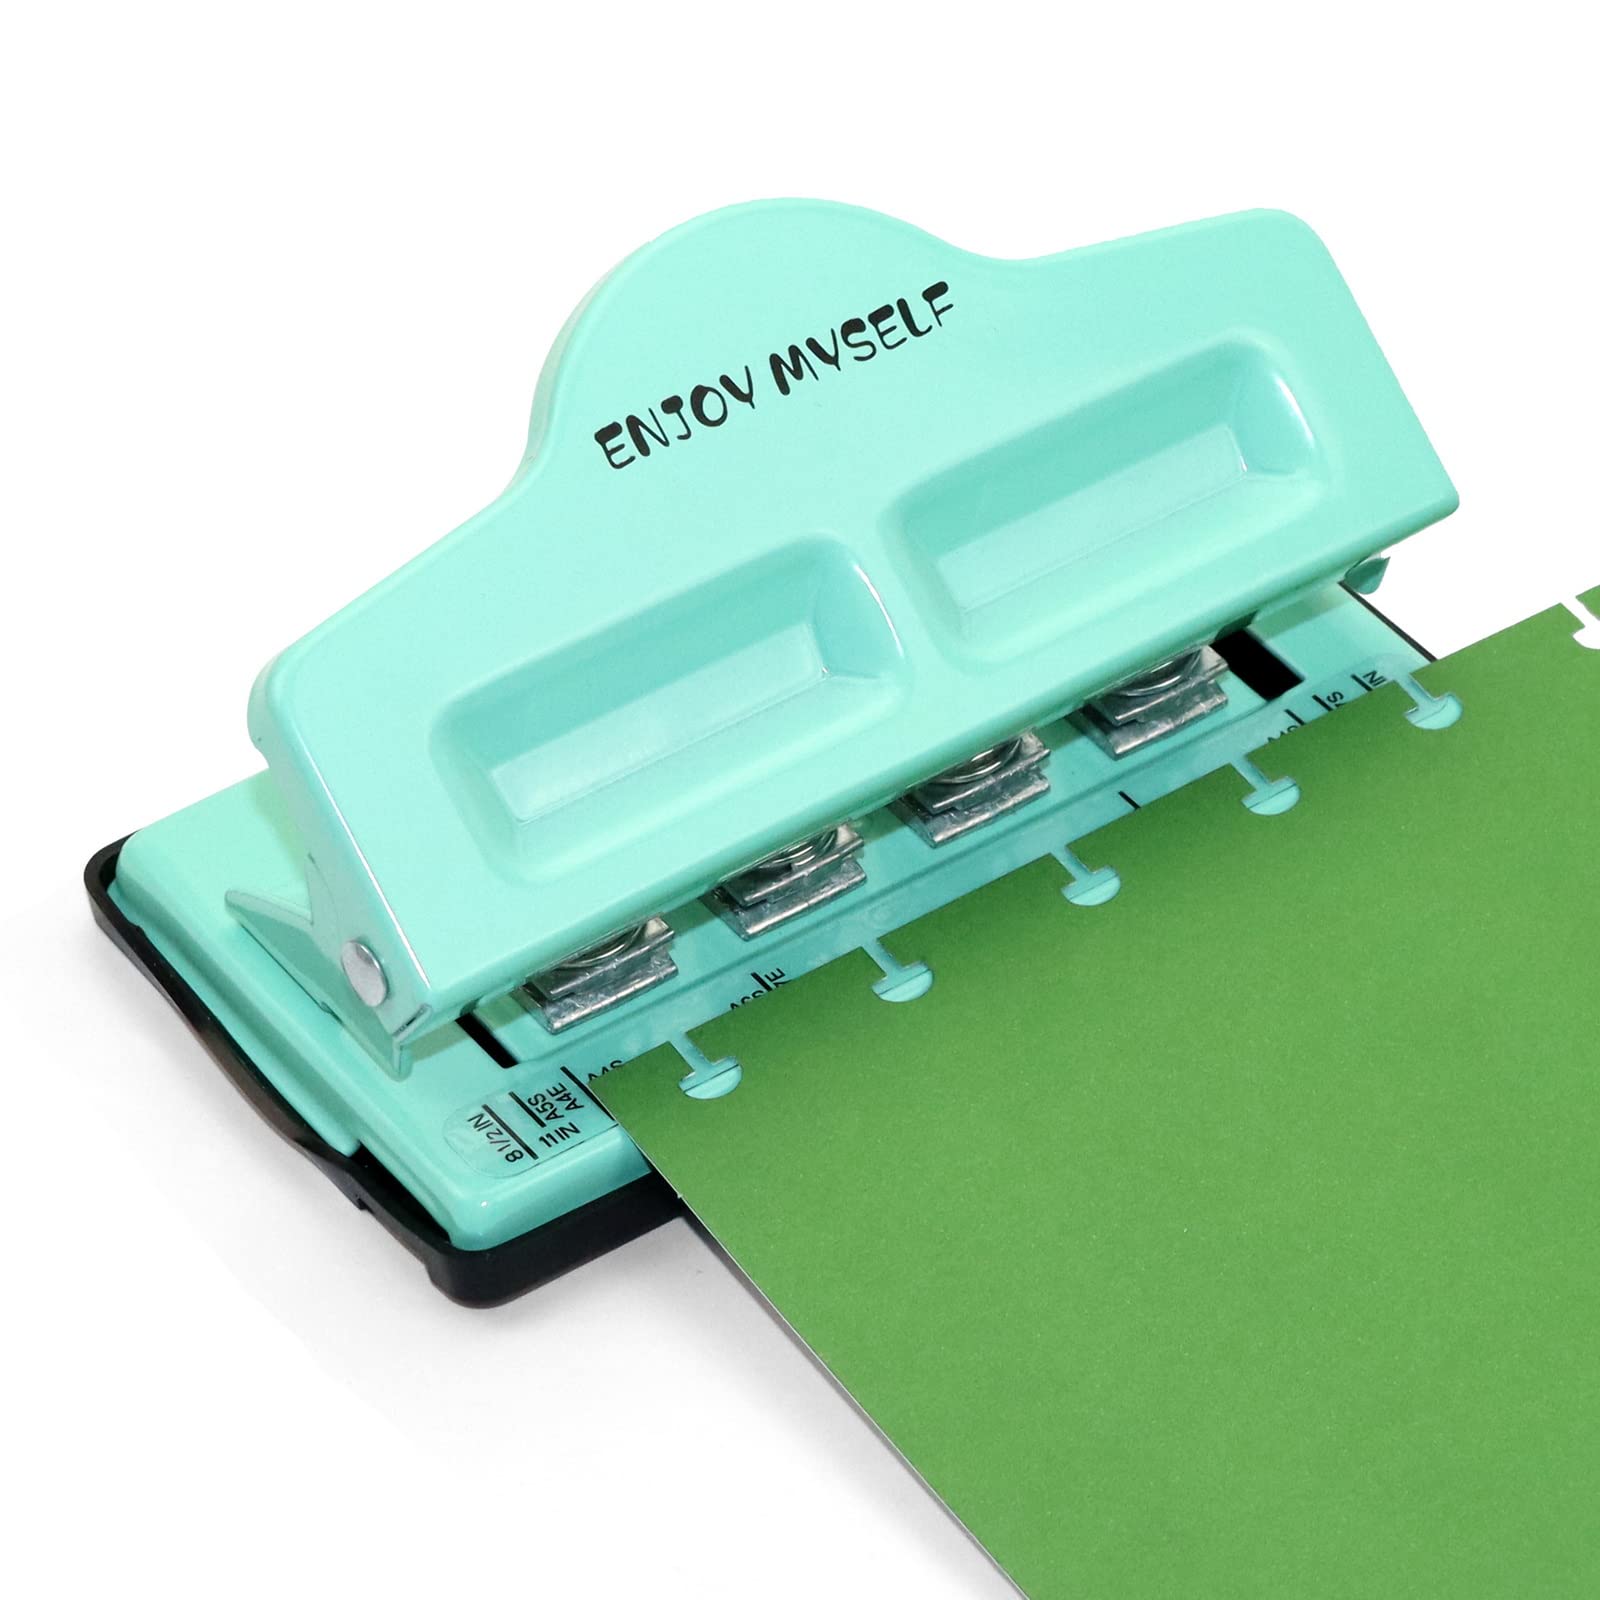 Handheld Hole Punch Office Paper Hole Punch Portable Hole Puncher Classic  Single Hole Puncher